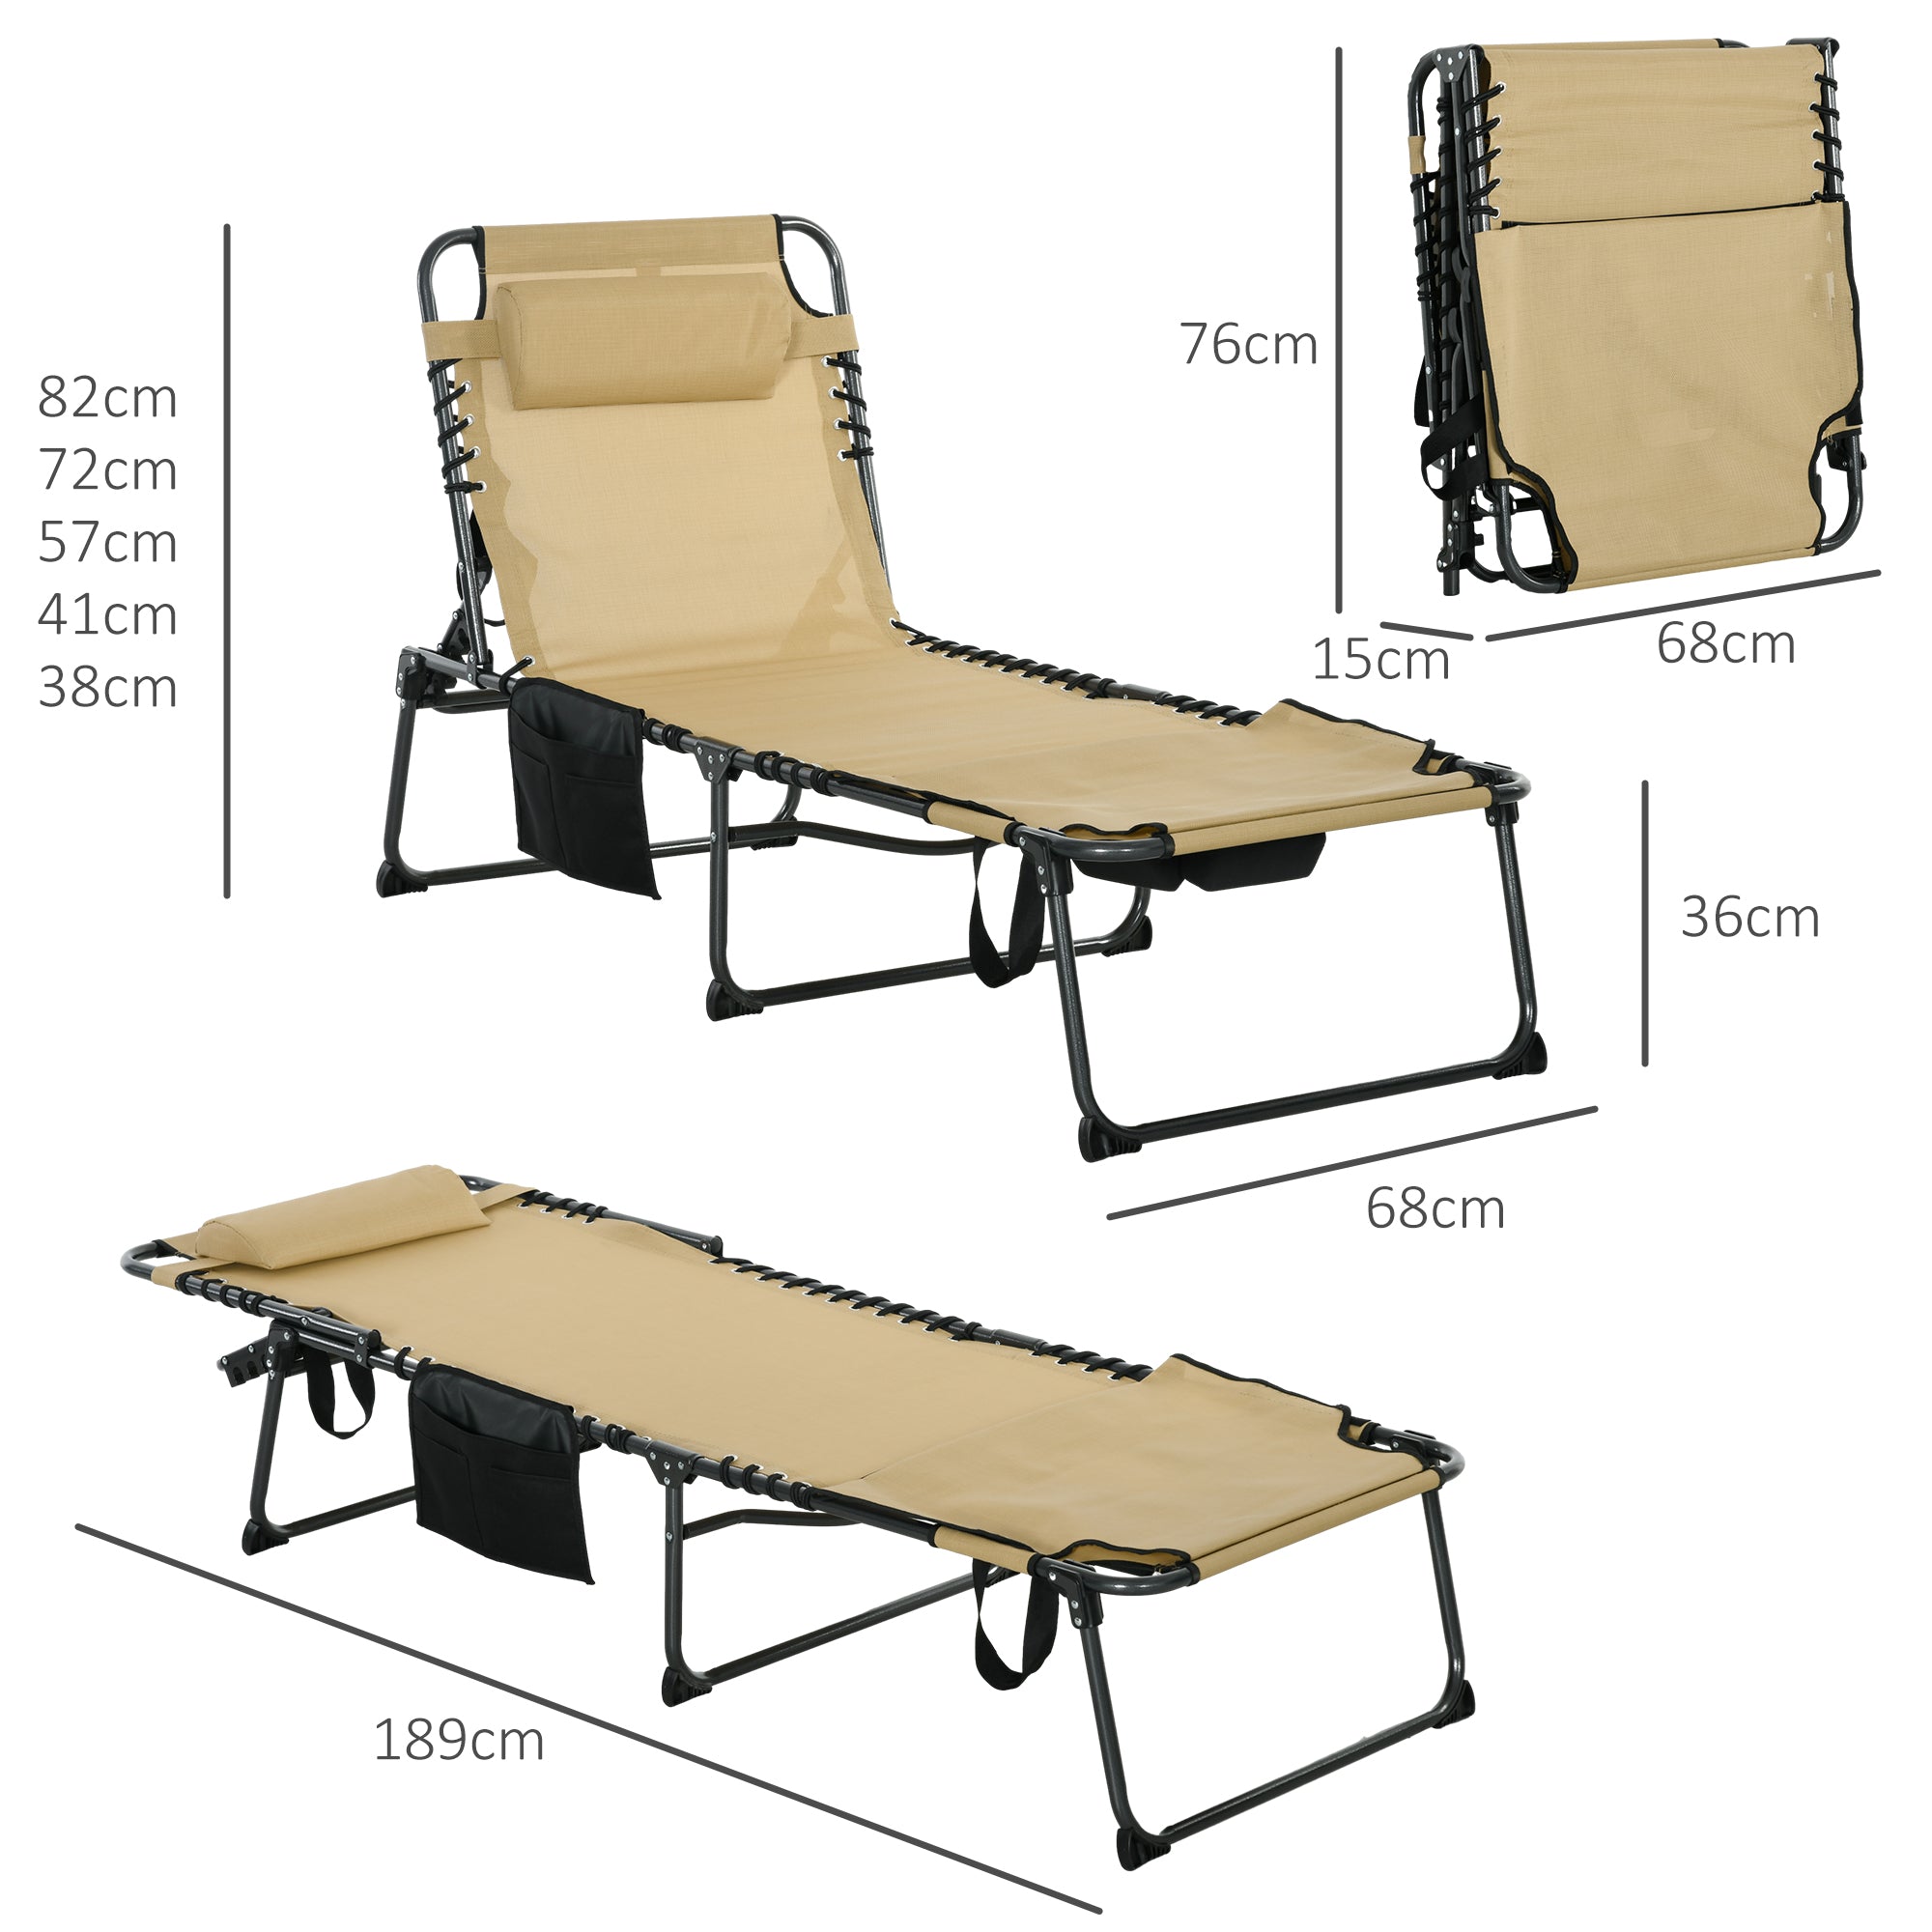 Folding Sun Lounge with 5-level Reclining Back, Outdoor Tanning Chair with Reading Hole, Outdoor Sun Lounge with Side Pocket, Headrest, for Beach, Yard, Patio, Beige-2